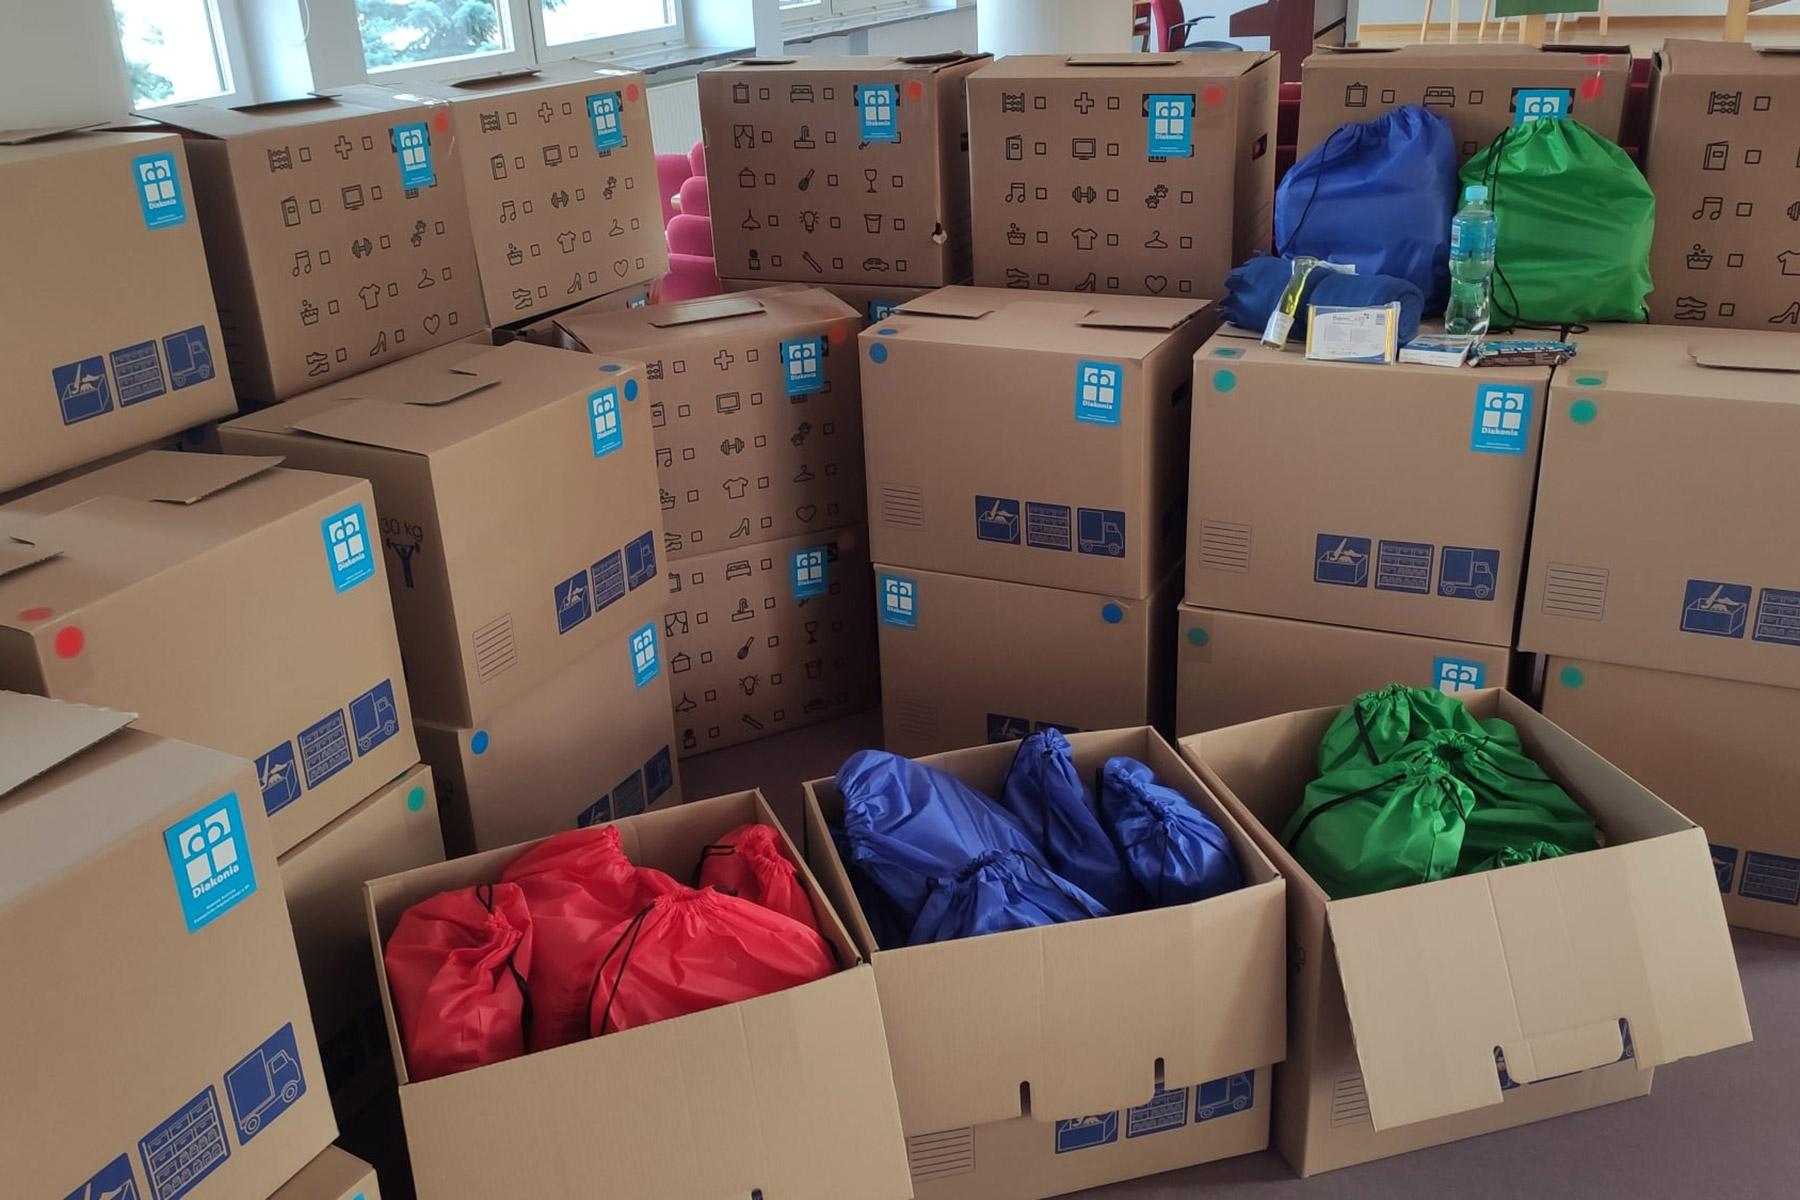 Supplies ready for distribution to the hospital and detention center at the border of Poland and Belarus where thousands of migrants are stranded. Photo: Diaconia Poland